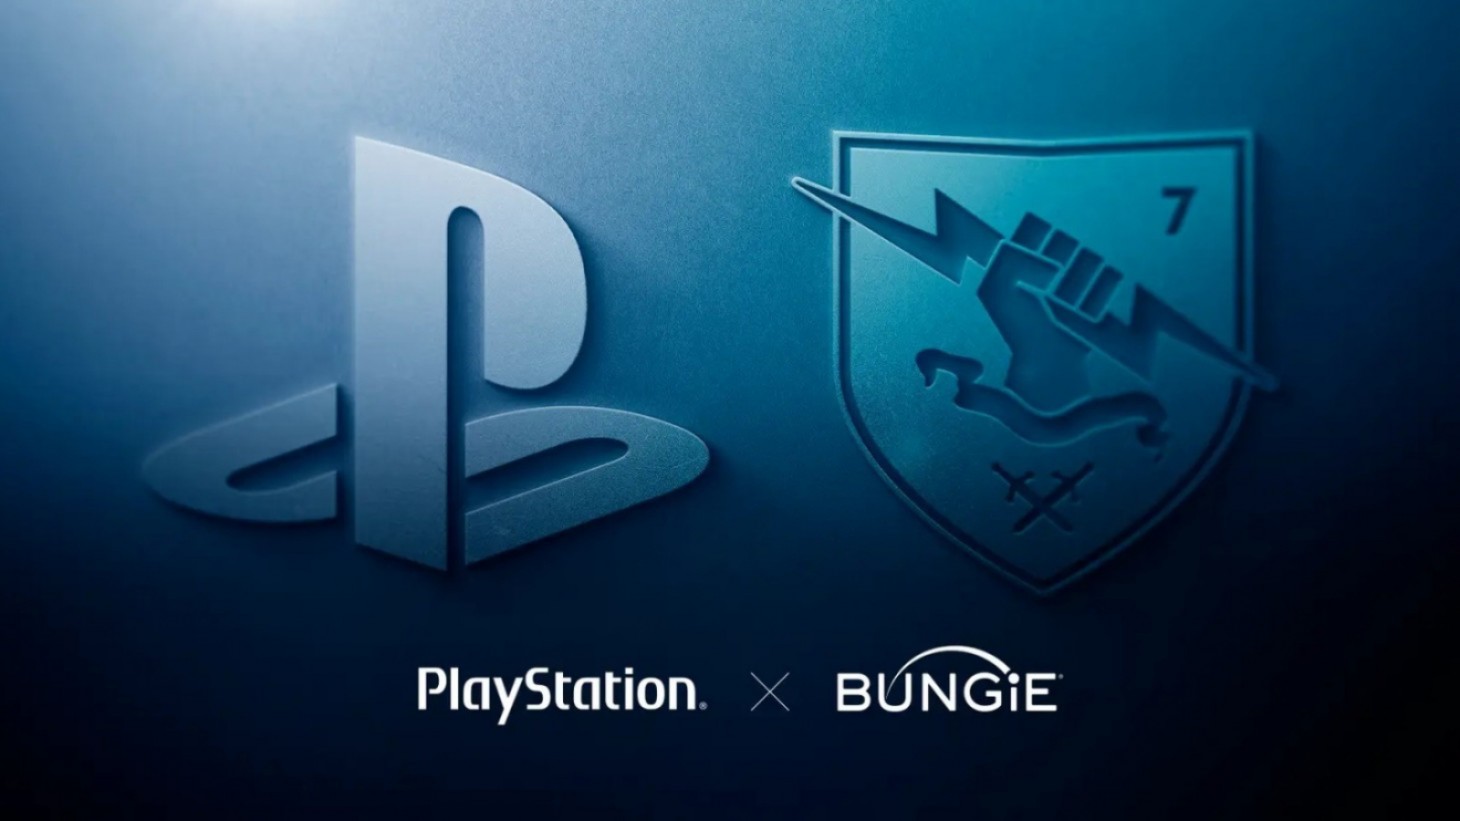 PlayStation Sony Bungie Live Service Games